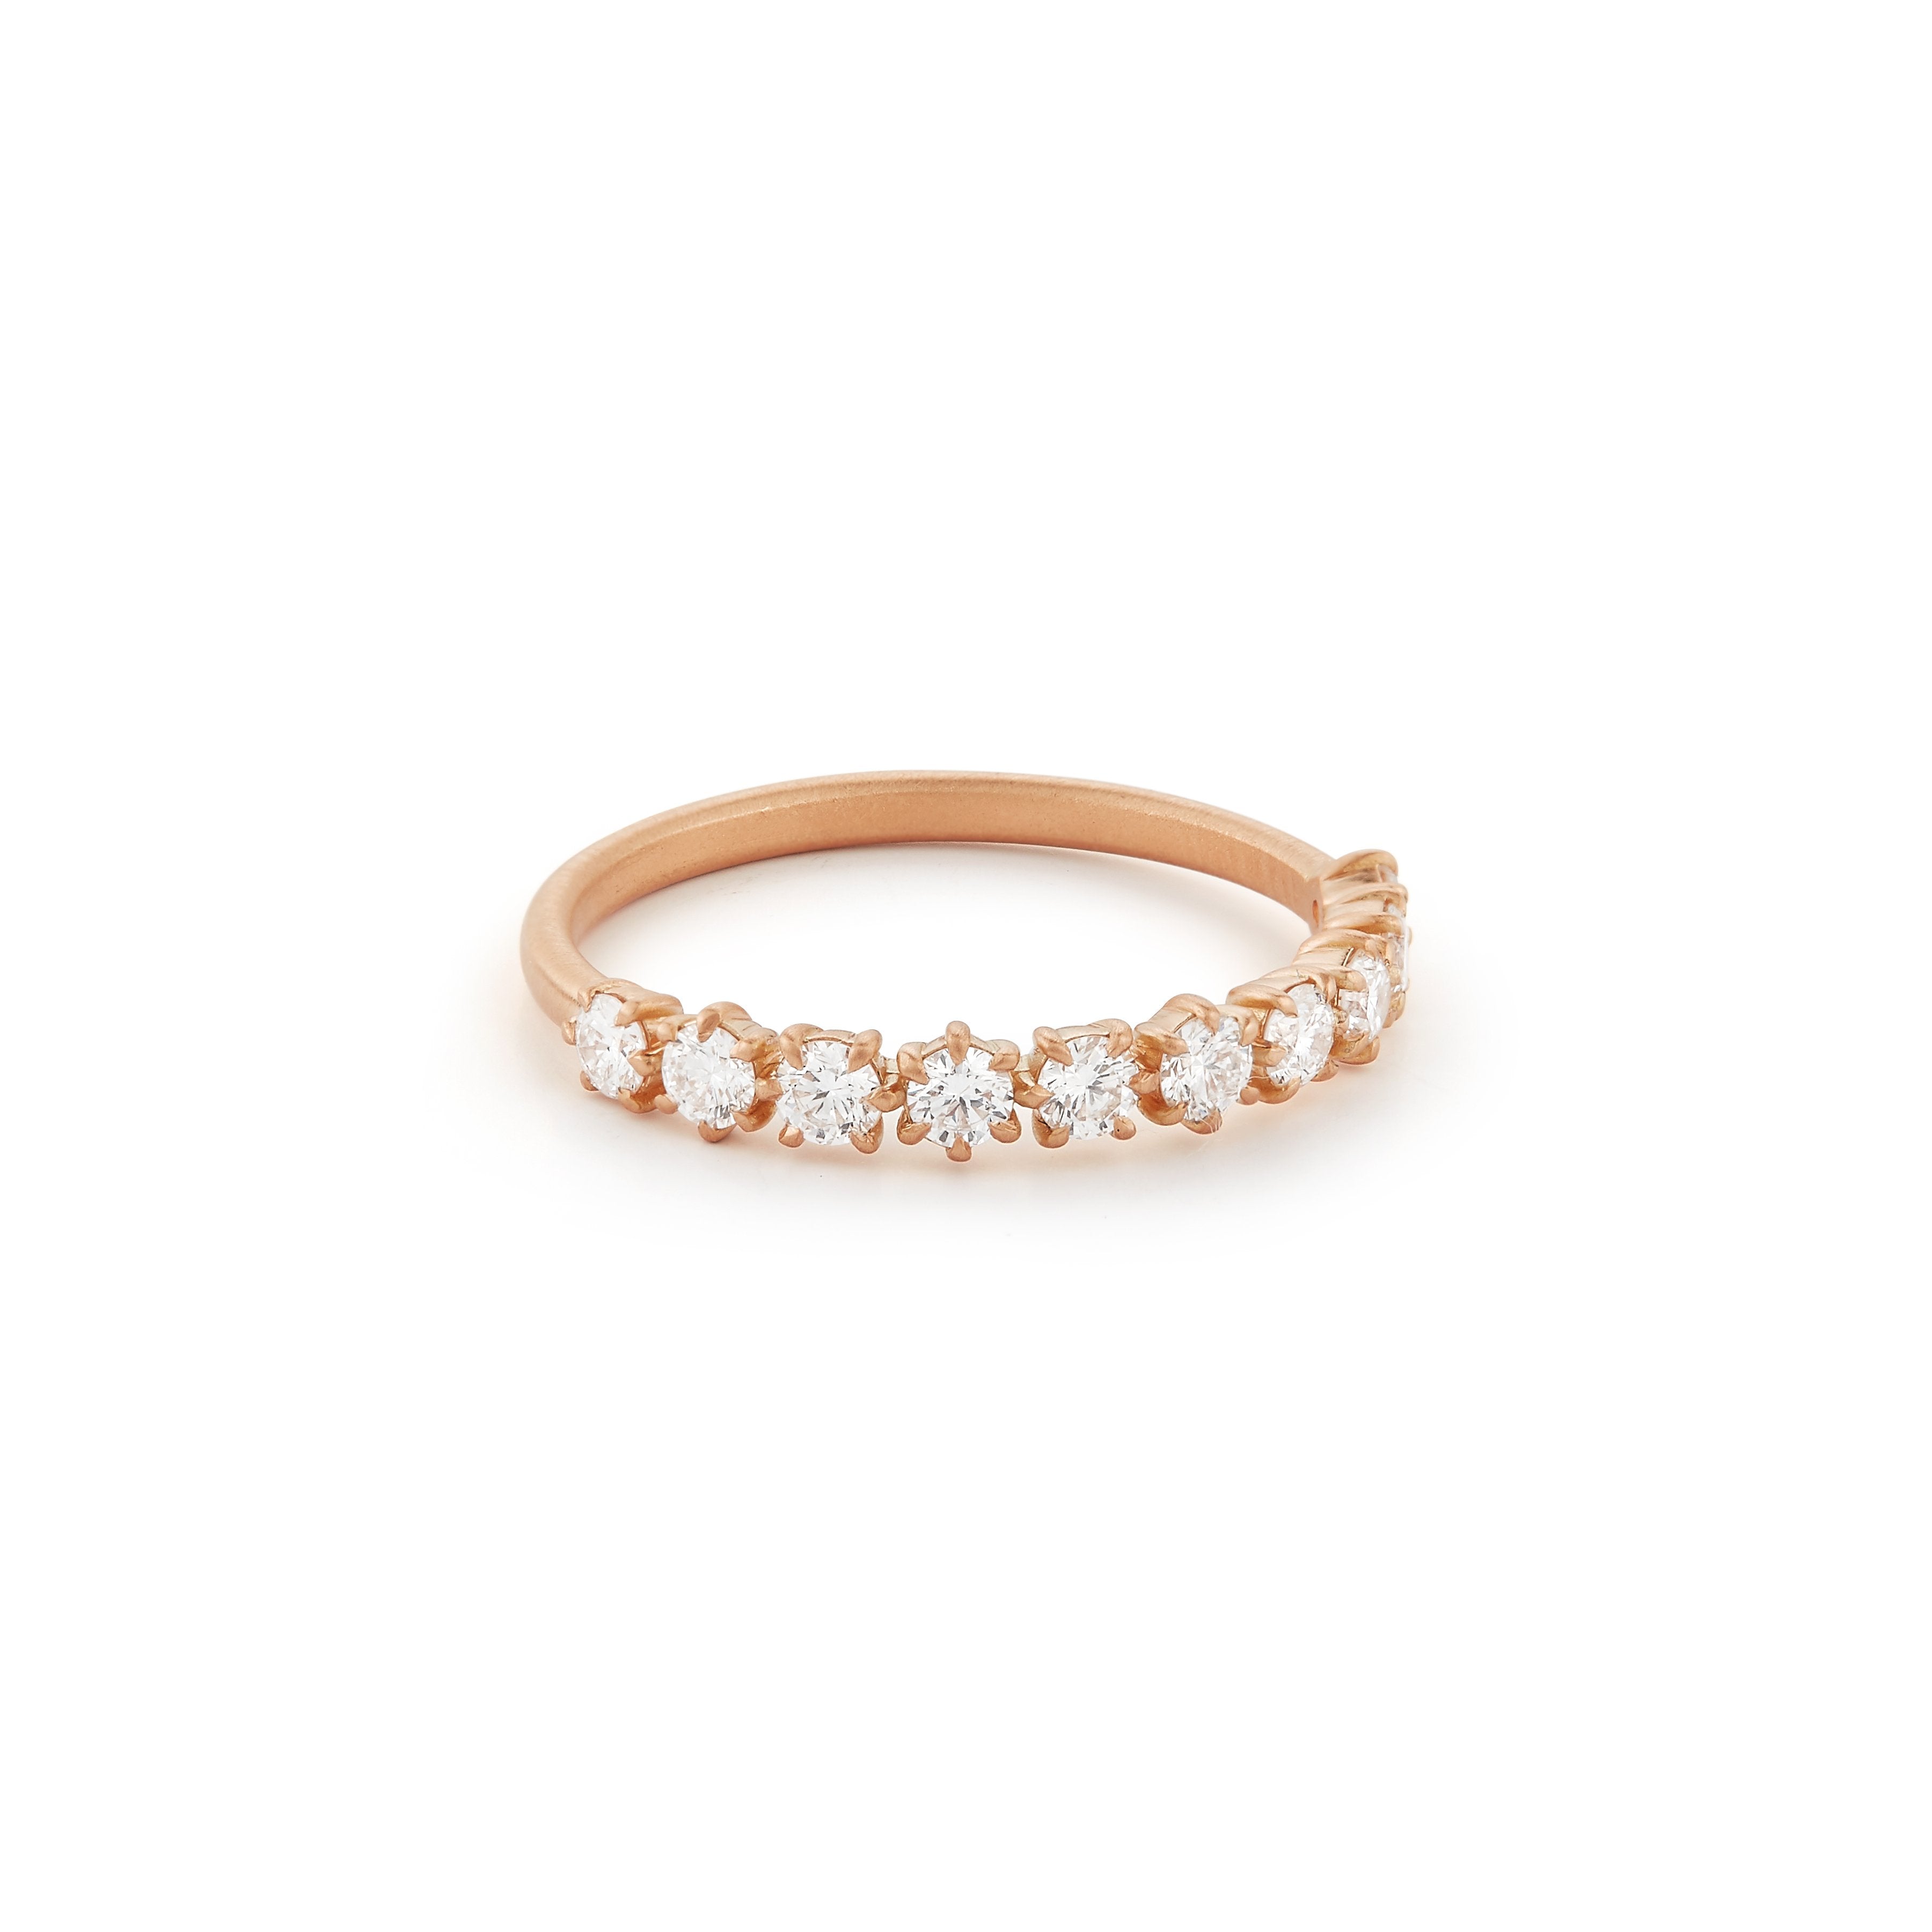 Catherine 1/2 Way Eternity No. 1 in 18K Rose Gold